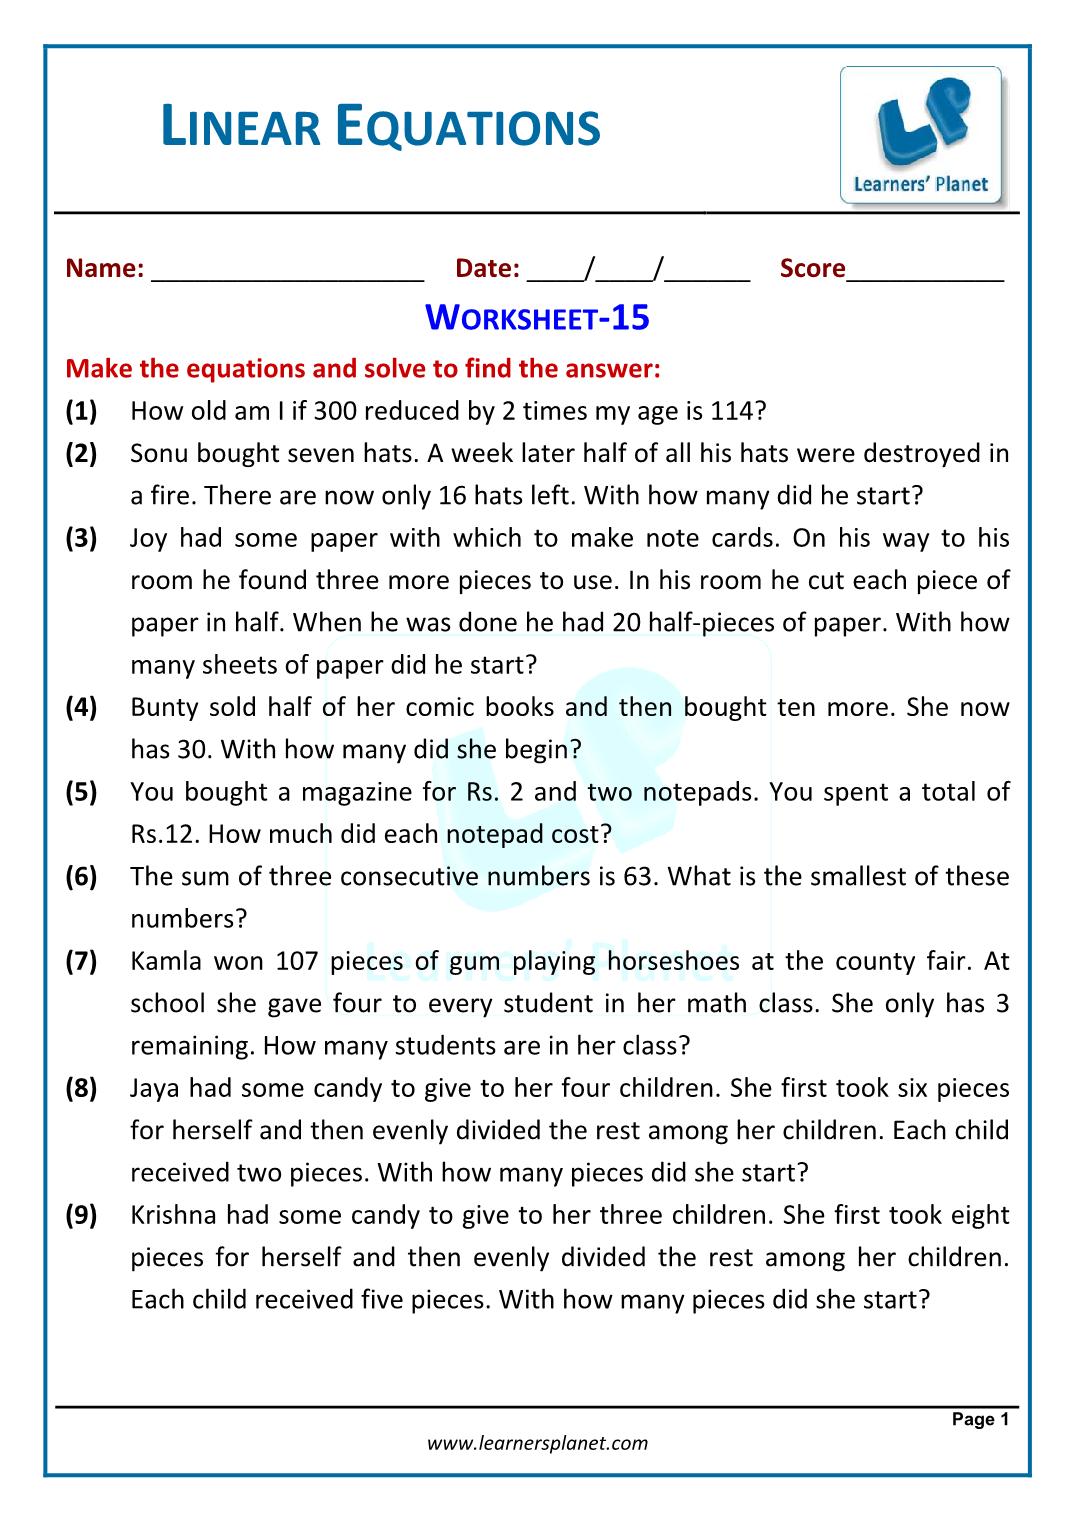 Linear equation word problems worksheet with answer Intended For Linear Functions Word Problems Worksheet